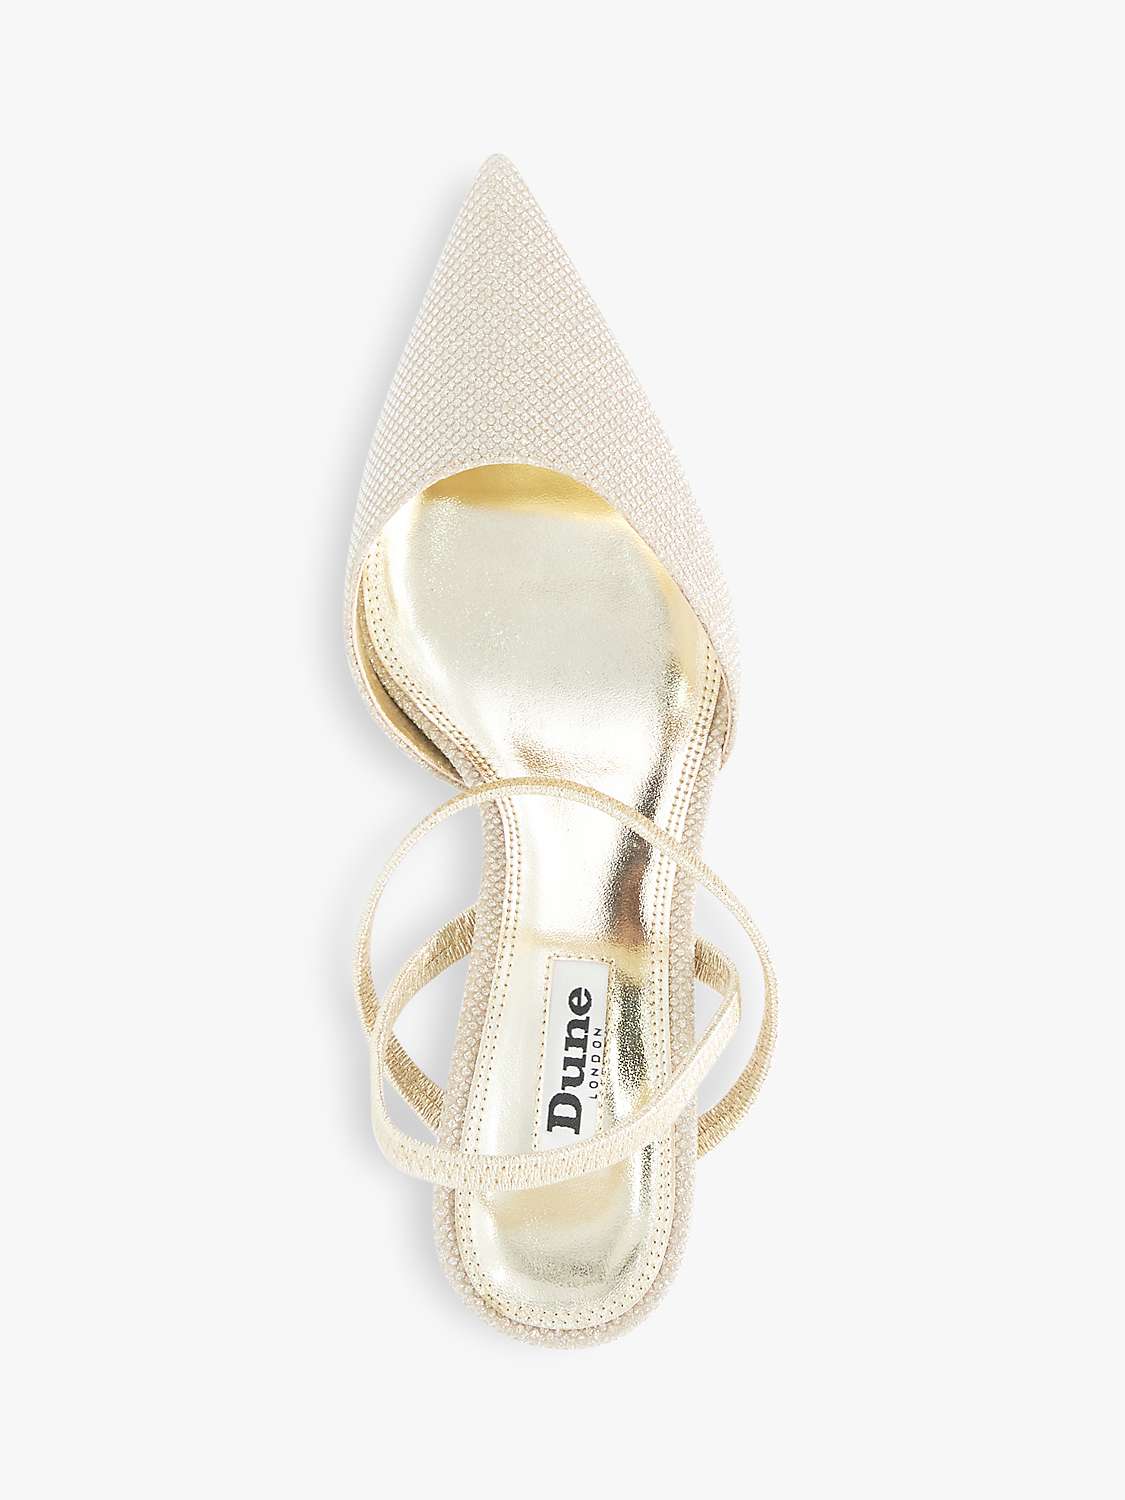 Buy Dune Wide Fit Classical Open Court Shoes, Gold Online at johnlewis.com